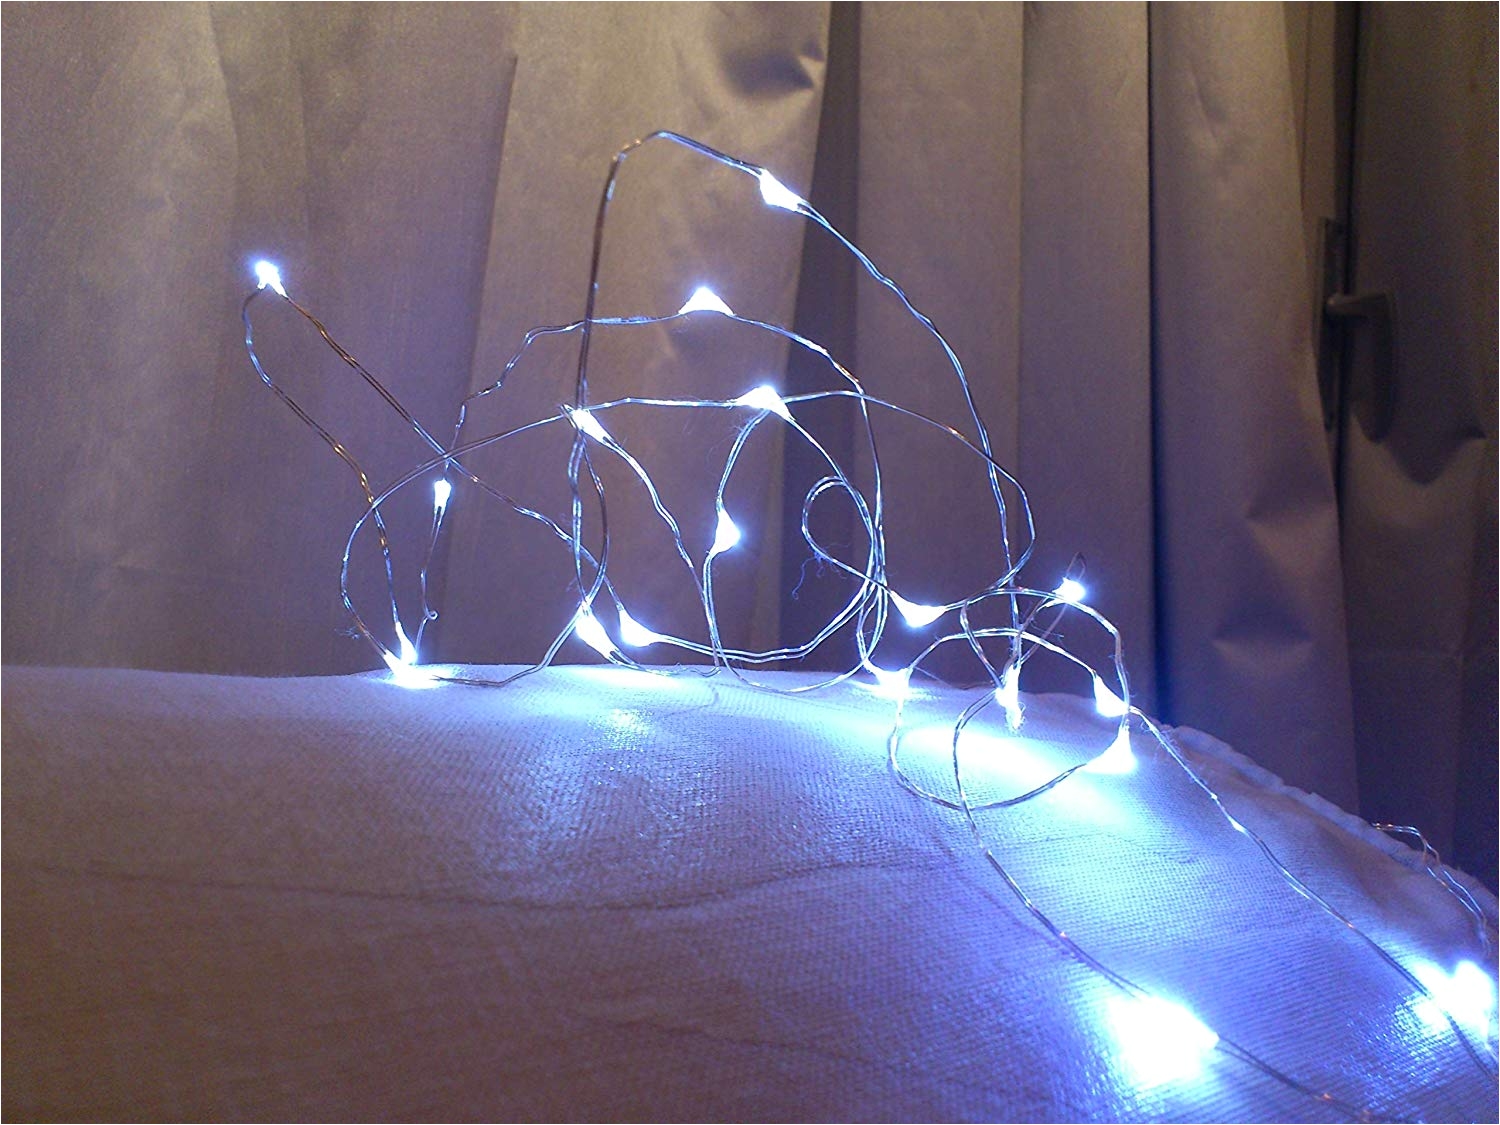 Micro Led Lights Battery Powered Amazon Com Fairy Lights Cool White W Batteries Packs Micro Leds